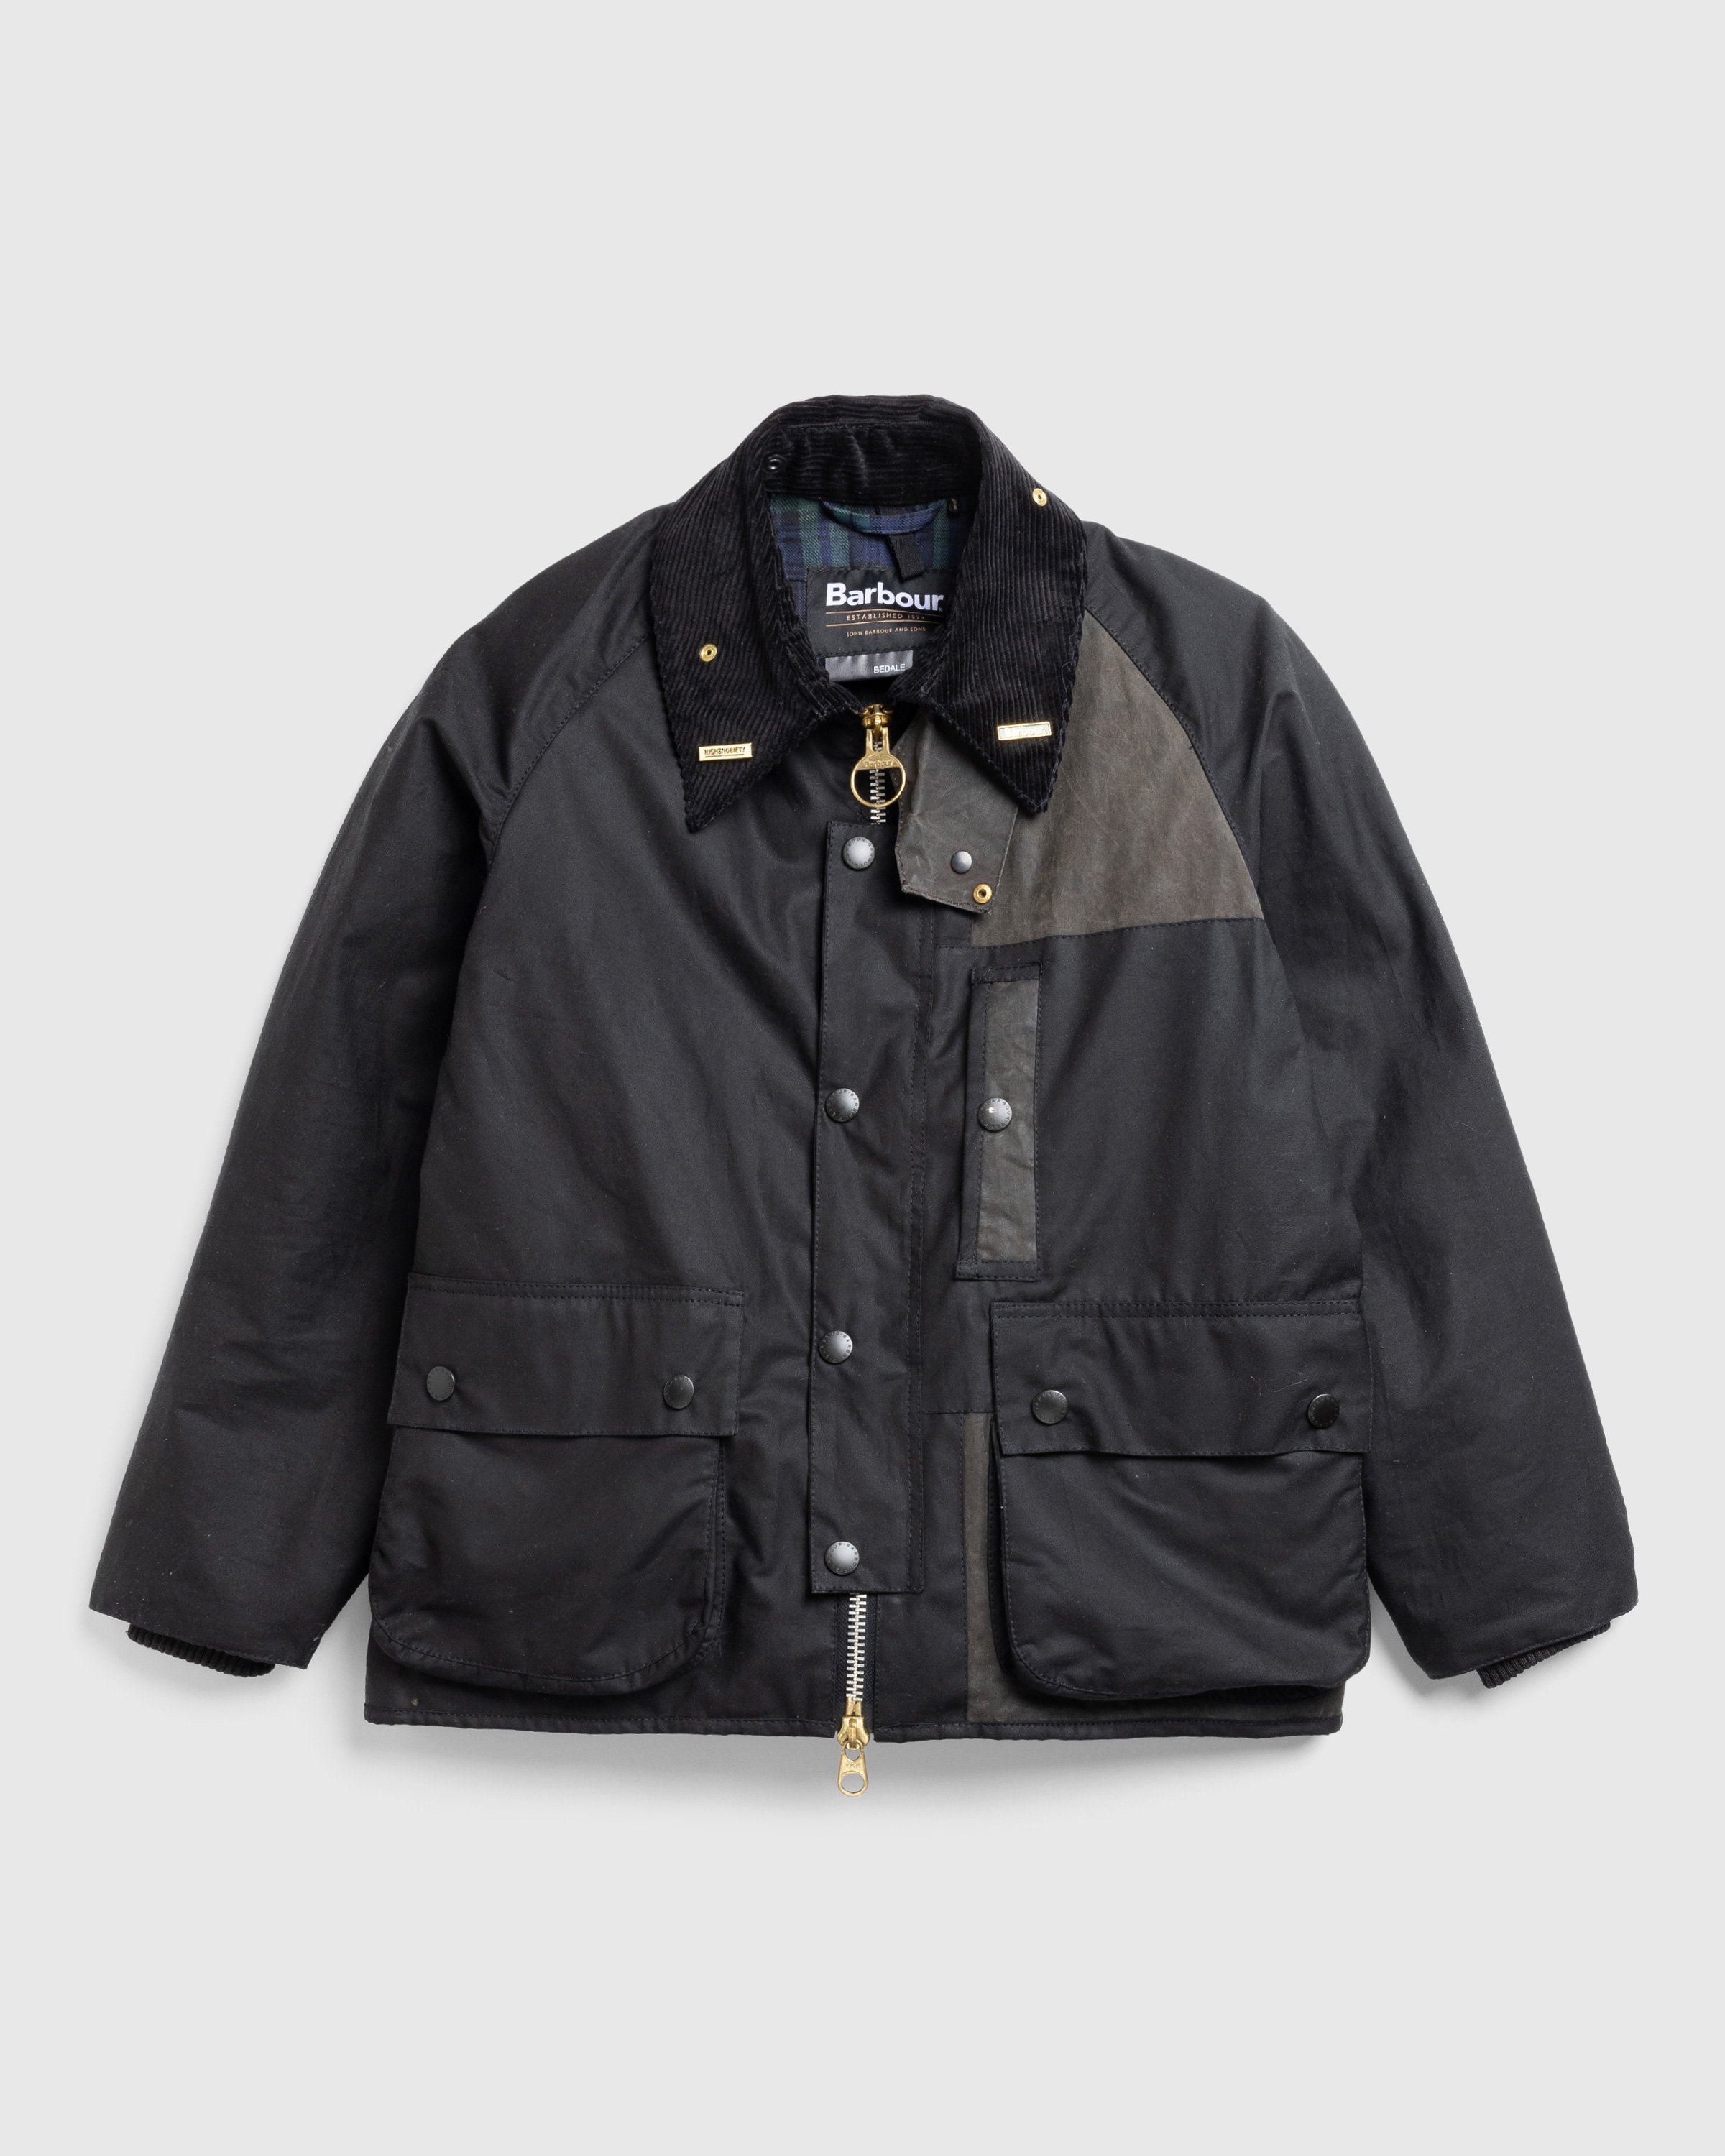 Barbour x Highsnobiety - Re-Loved Cropped Bedale Jacket 1 - 38 - Black - Clothing -  - Image 1